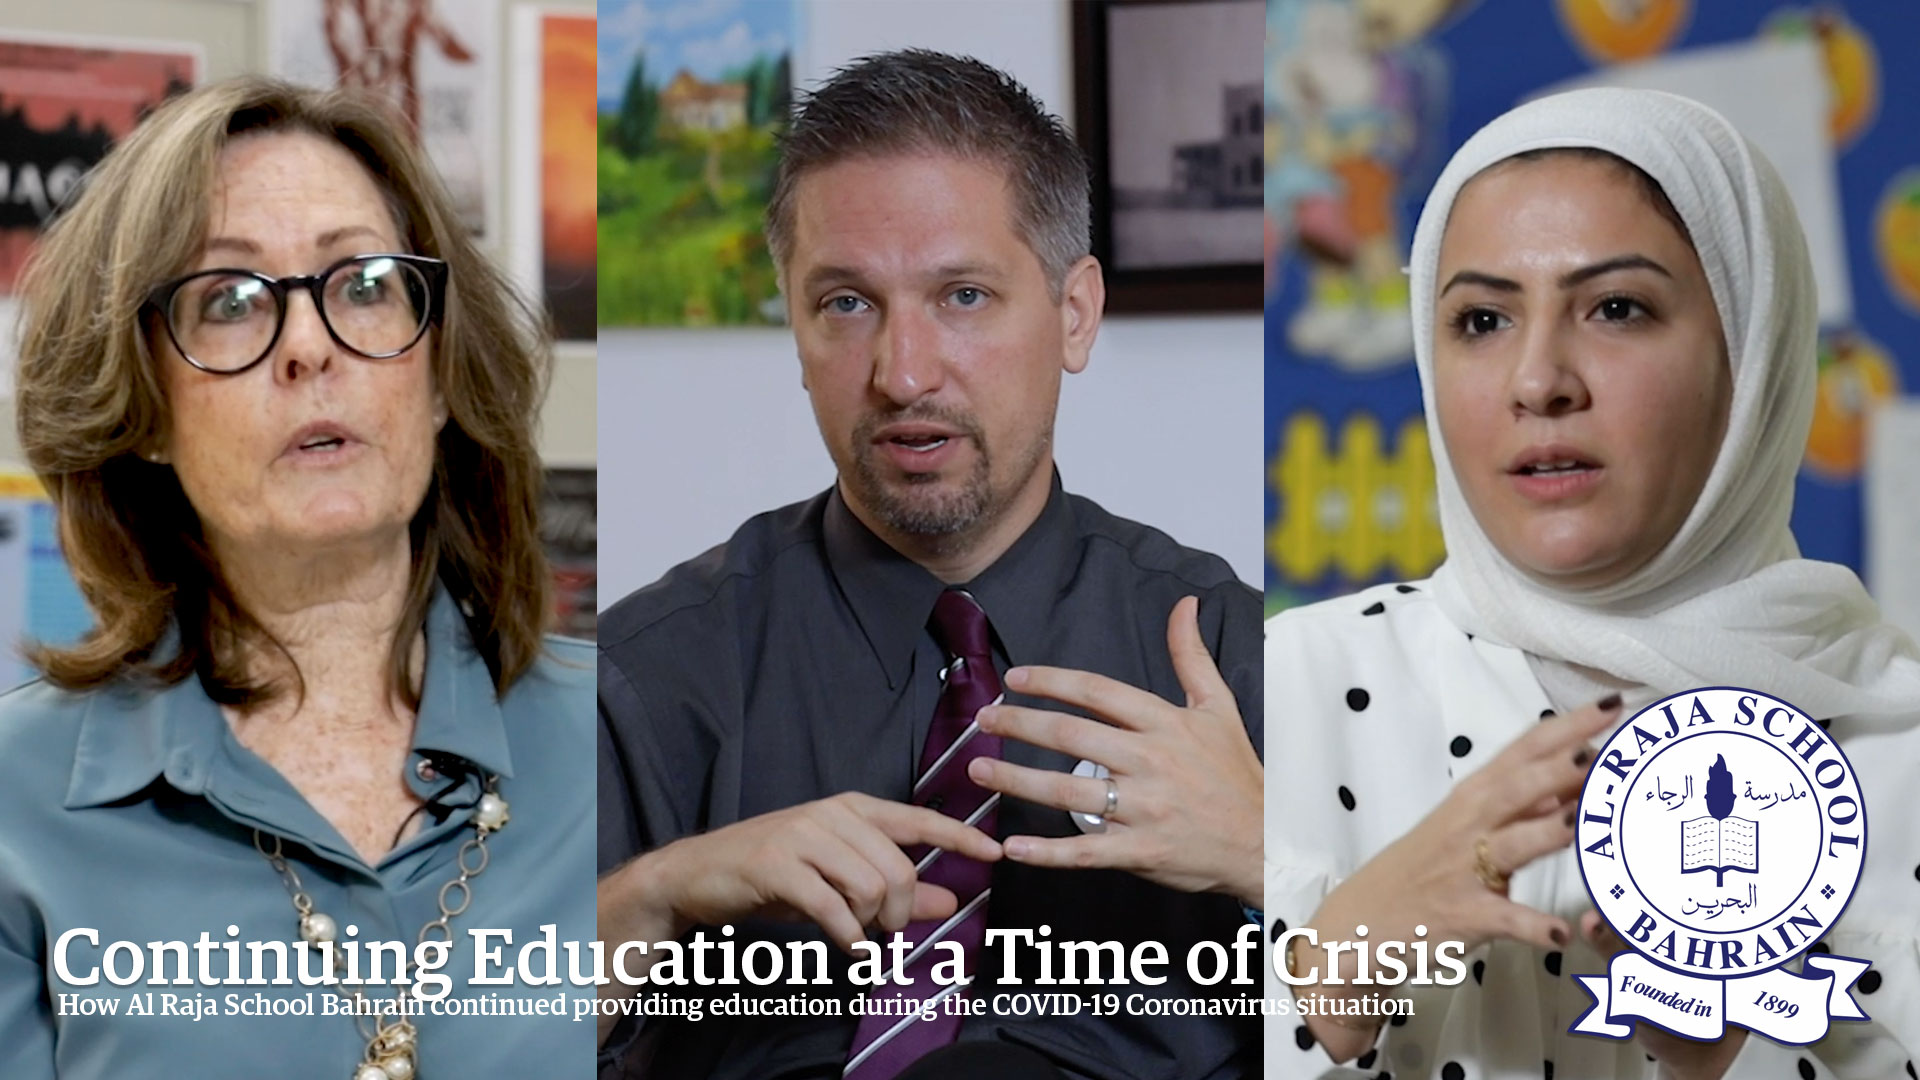 Case Study: Al Raja School – Continuing Education at a Time of Crisis